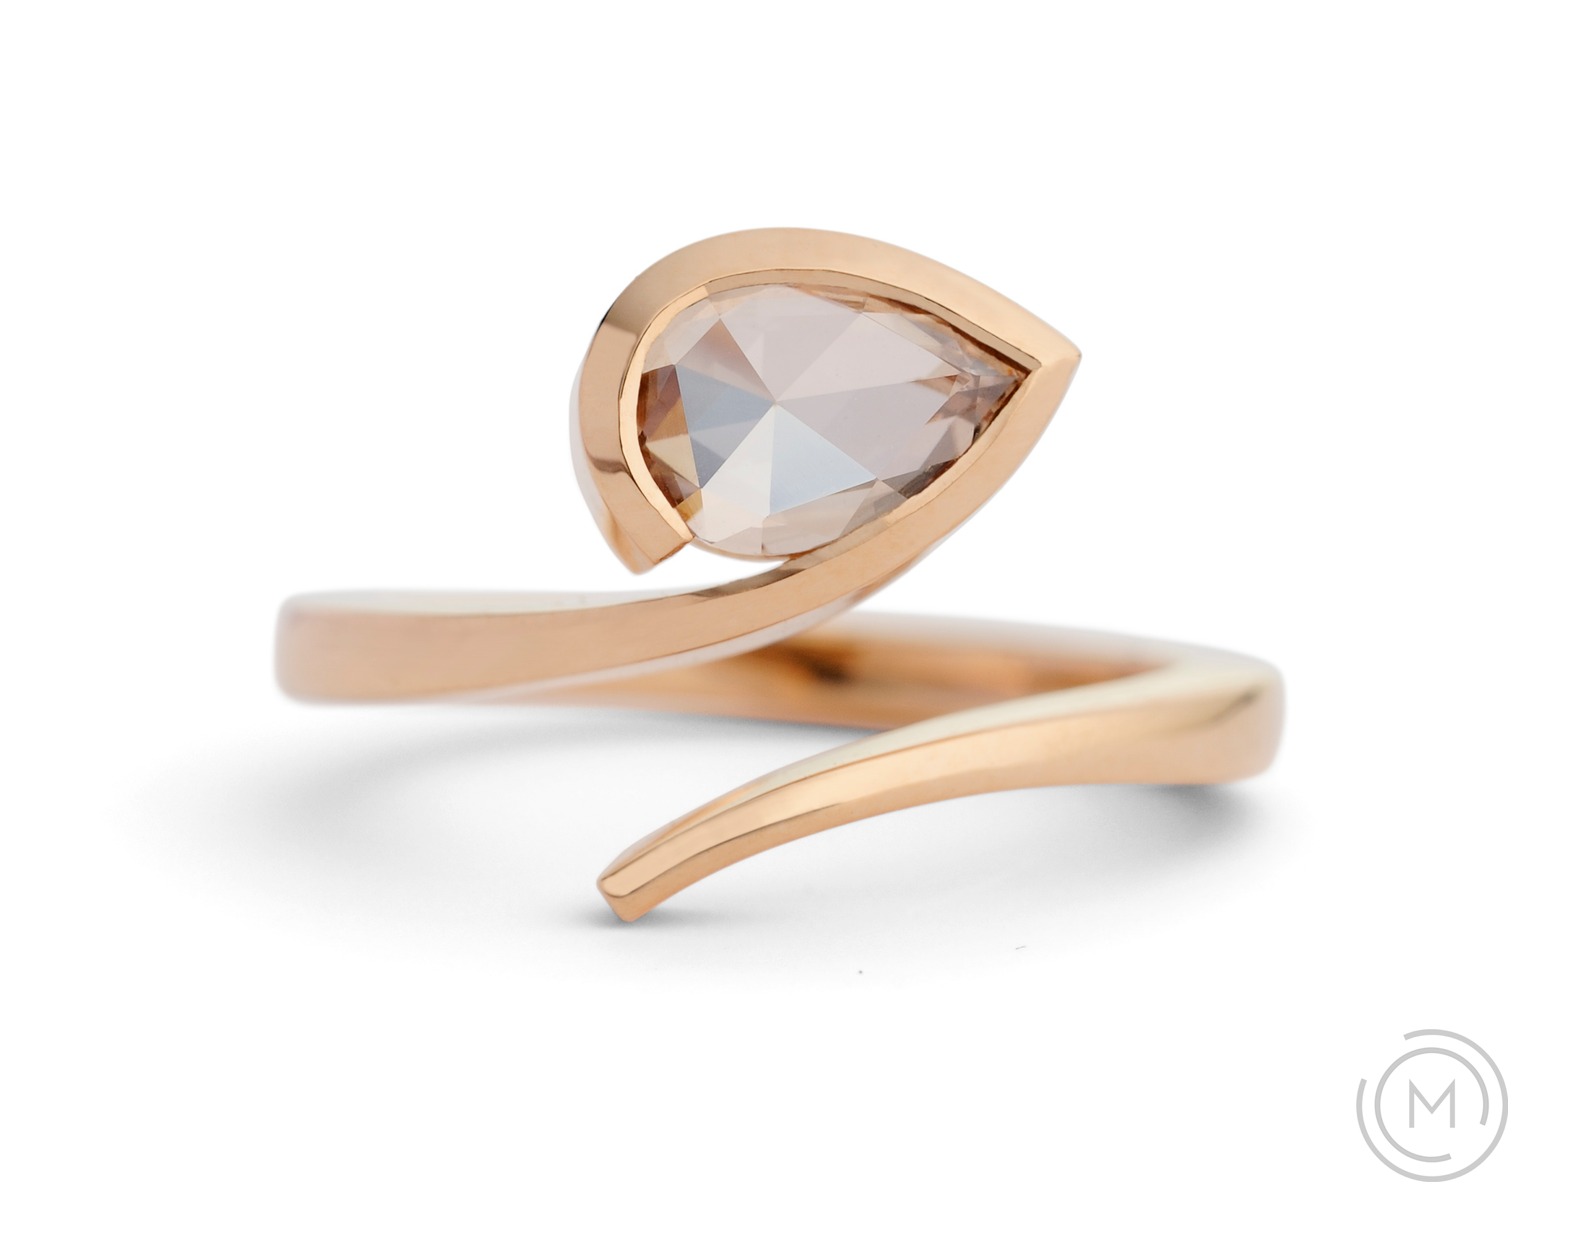 'Twist' rose gold engagement ring with pear cognac diamond